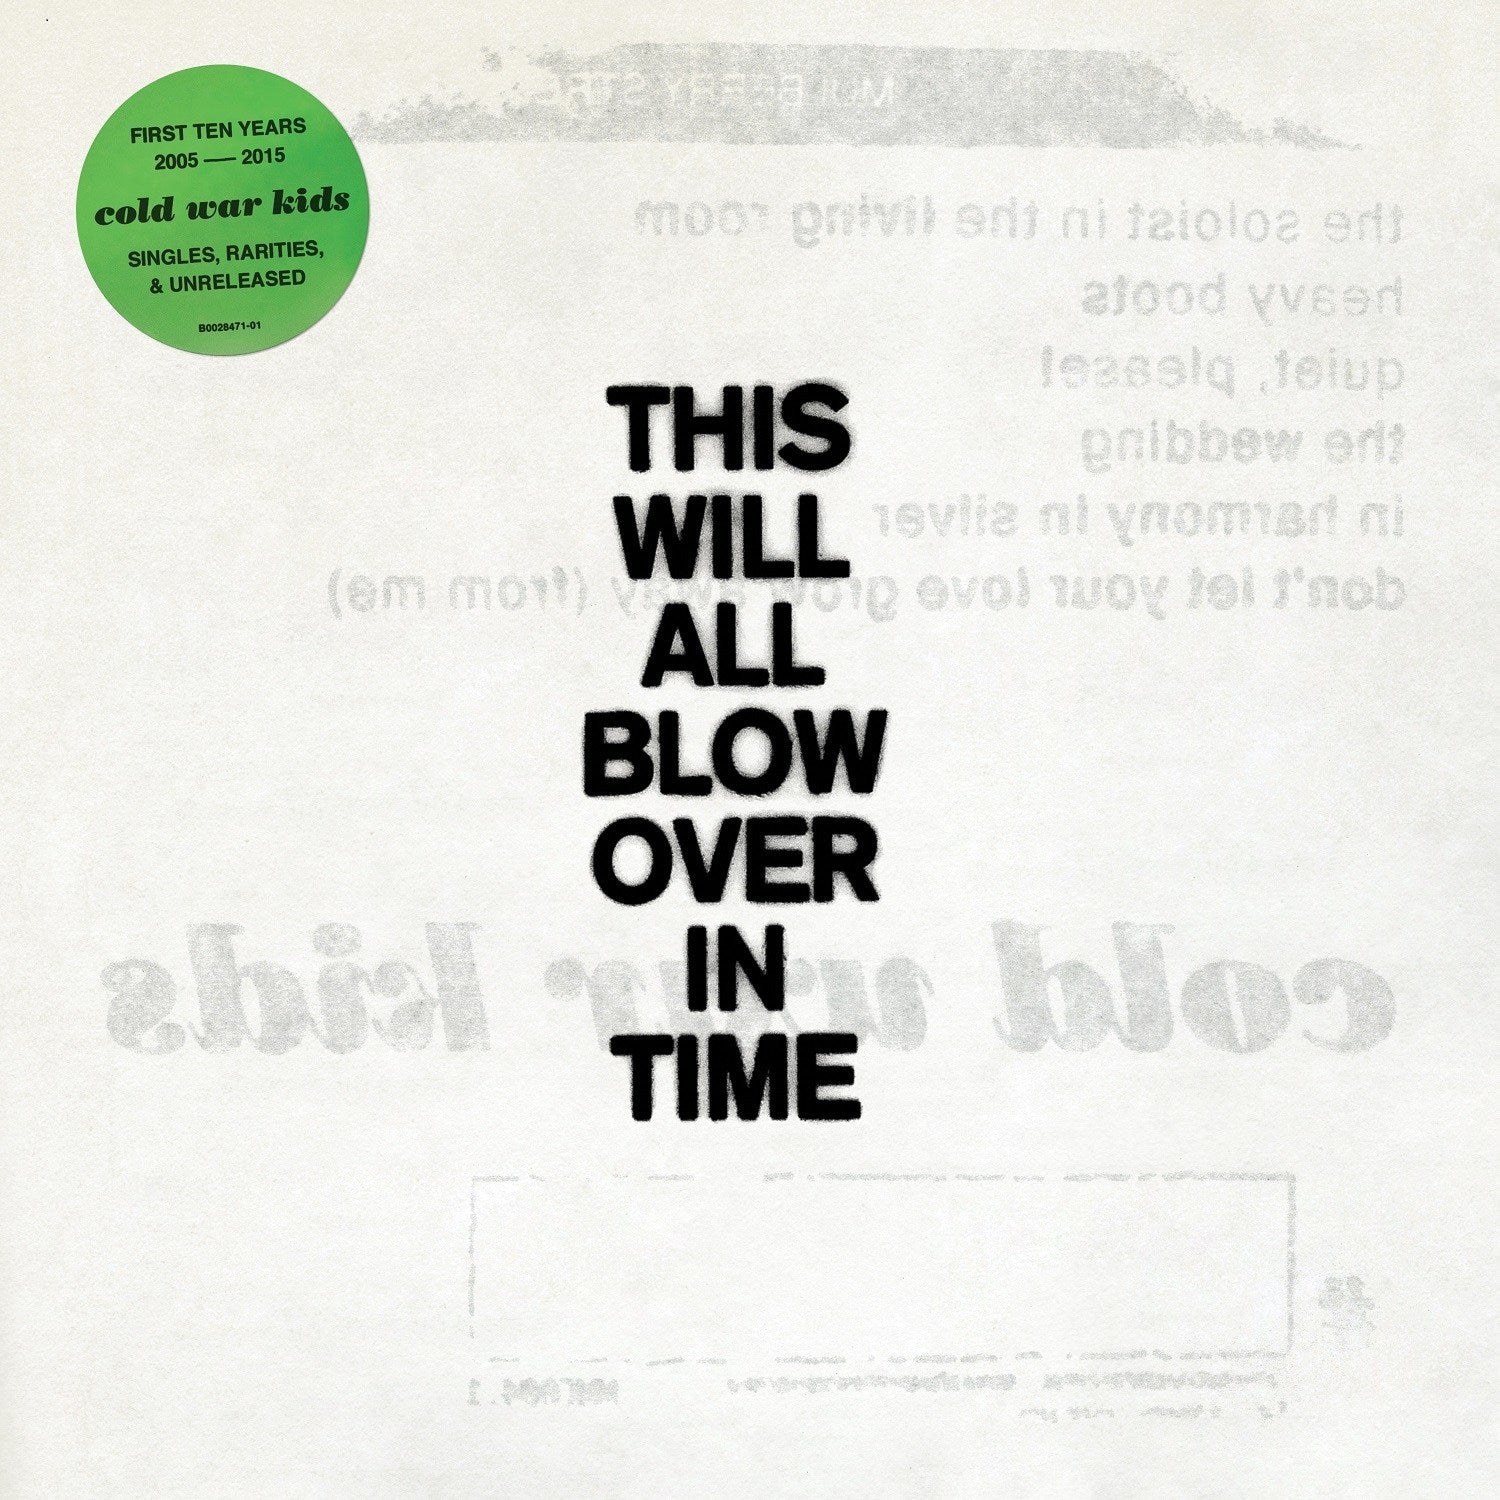 Cold War Kids - This Will All Blow Over In Time (Vinyl 2LP Record)